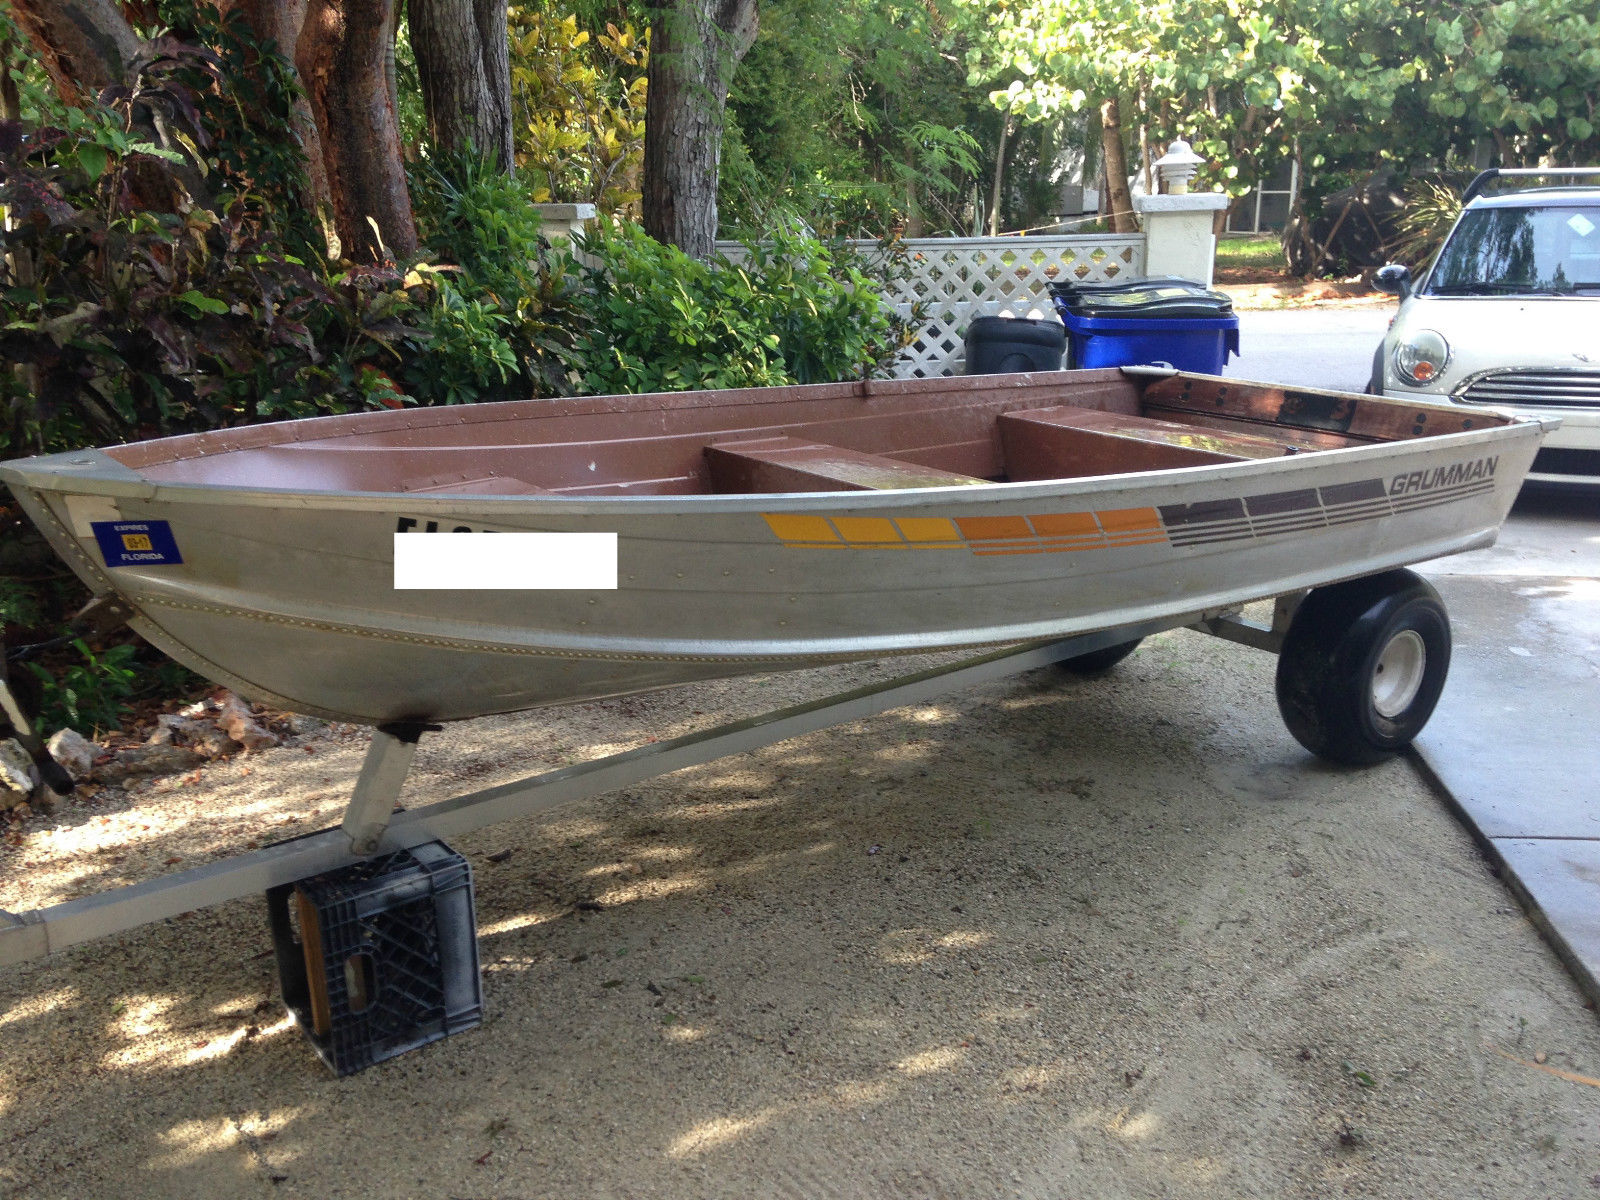 Grumman Cartopper 1984 for sale for $1,750 - Boats-from 